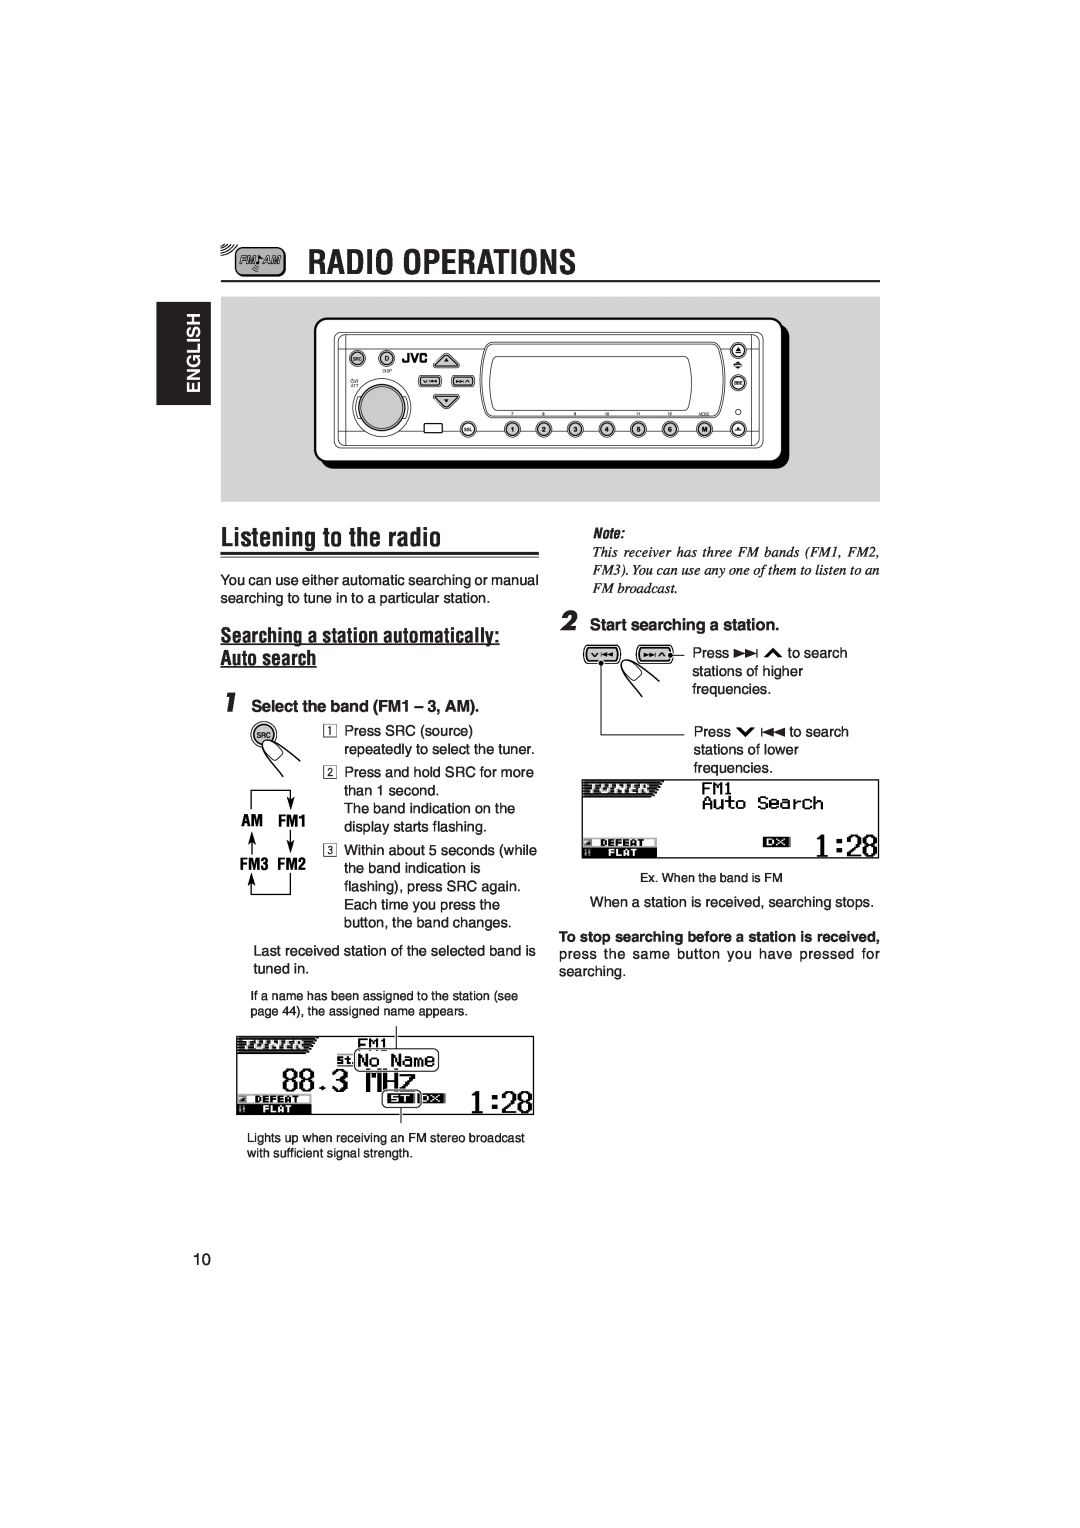 JVC KD-SH9105 manual Radio Operations, Searching a station automatically Auto search, Listening to the radio, English 